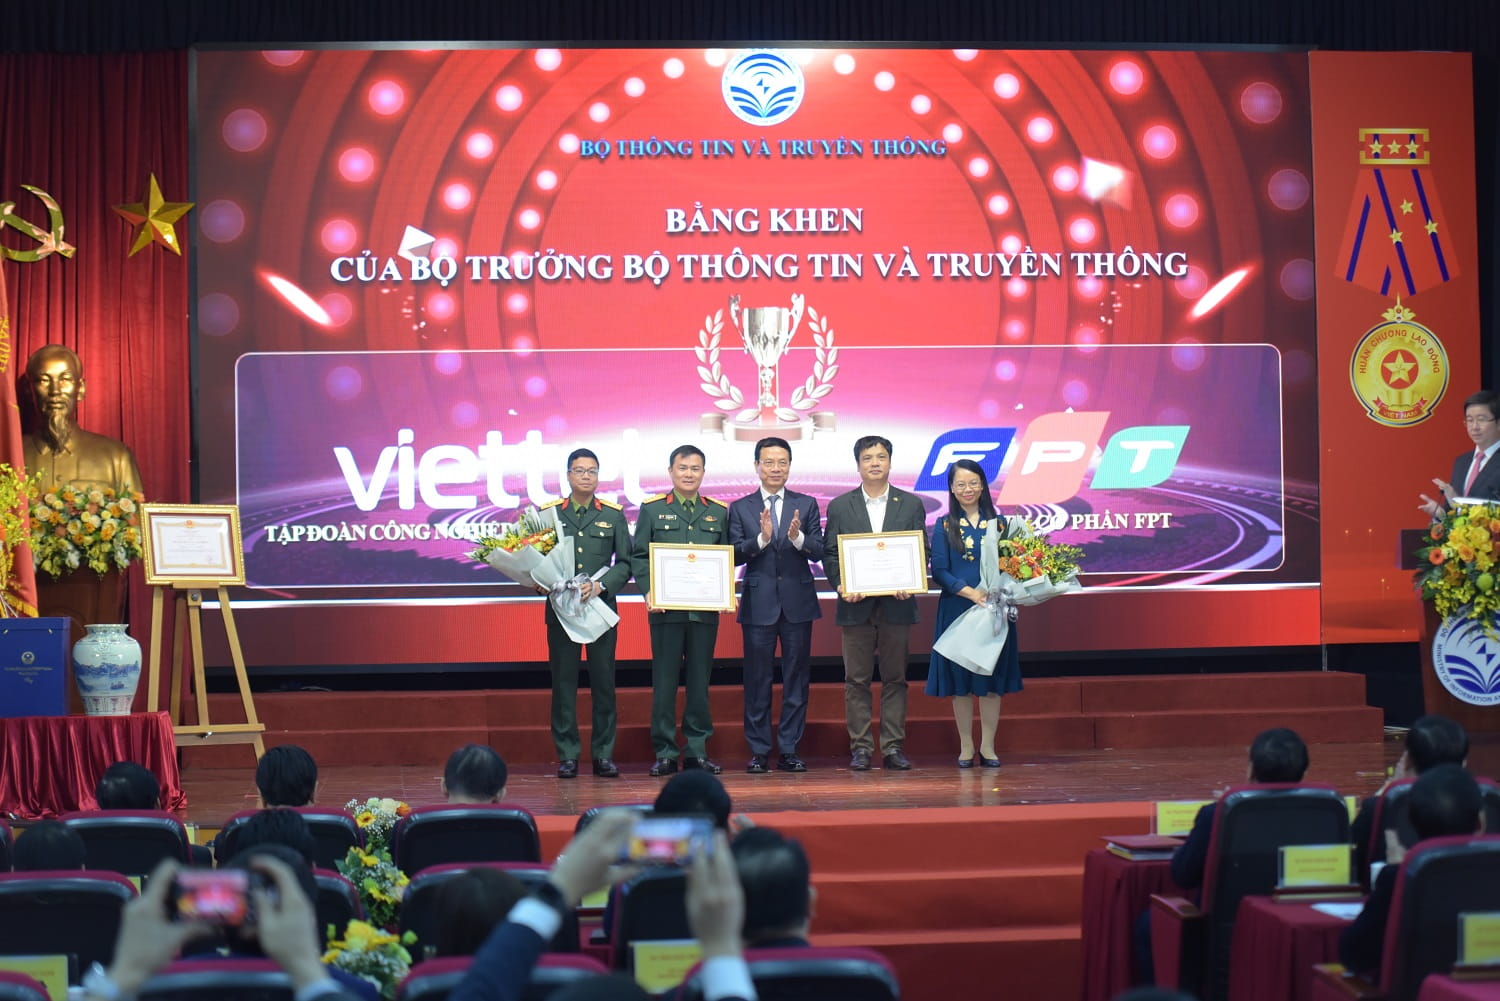 Receiving the Certificate of Merit from the MIC, FPT affirms its position as a globalization pioneer